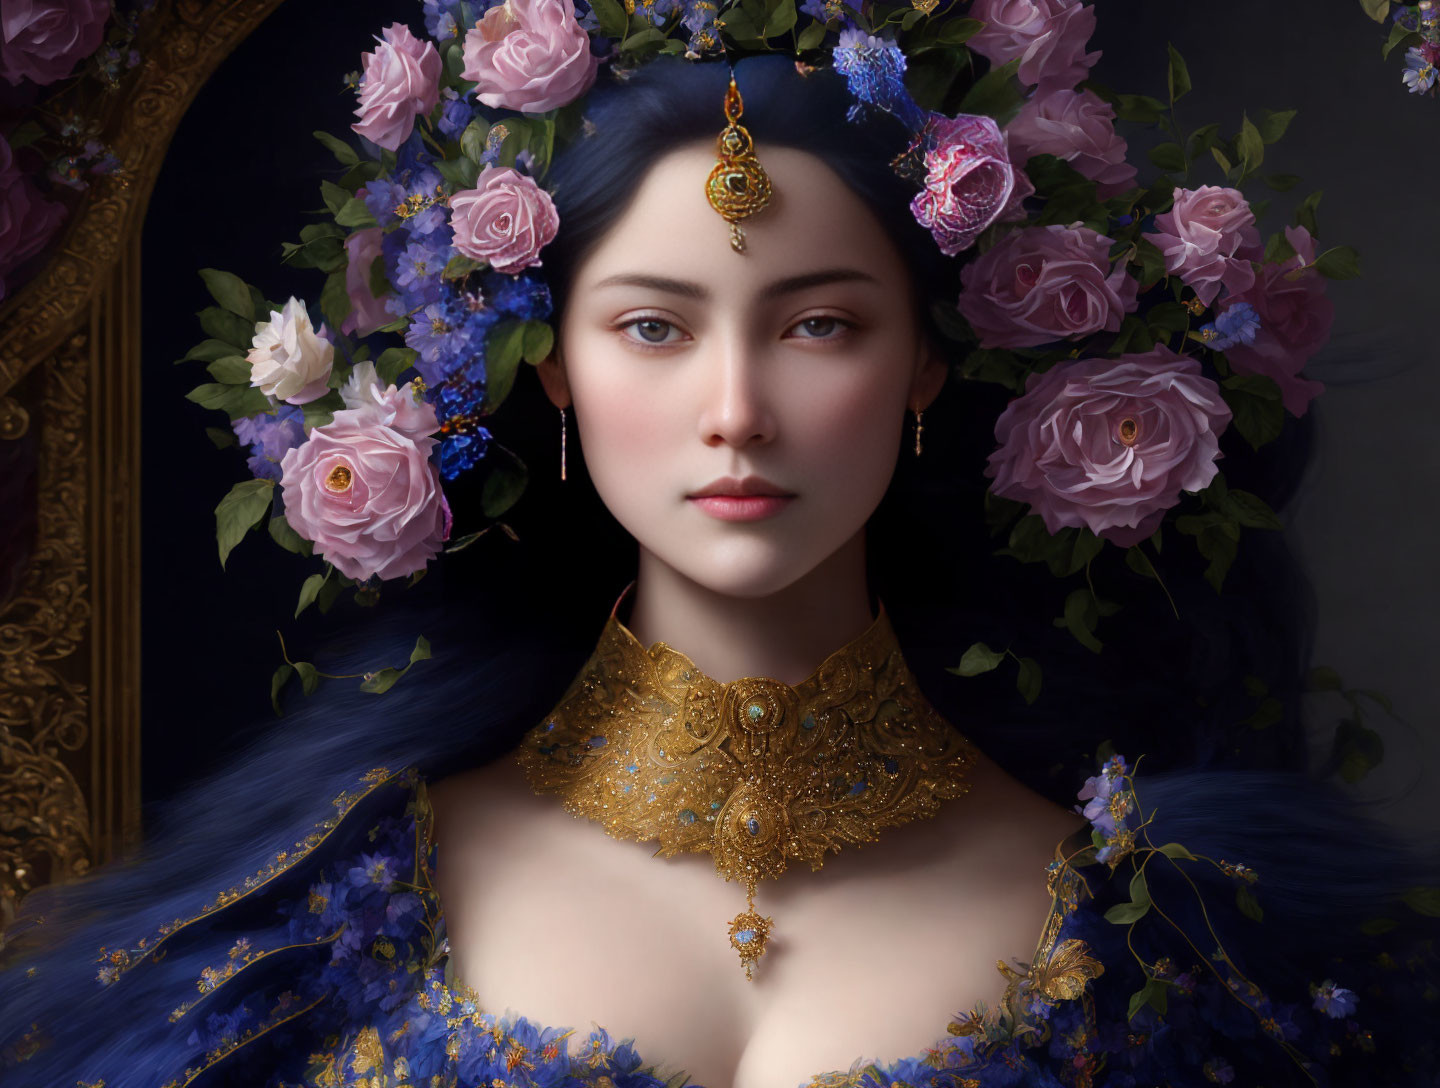 Stylized portrait of woman with blue hair and golden accessories on dark background